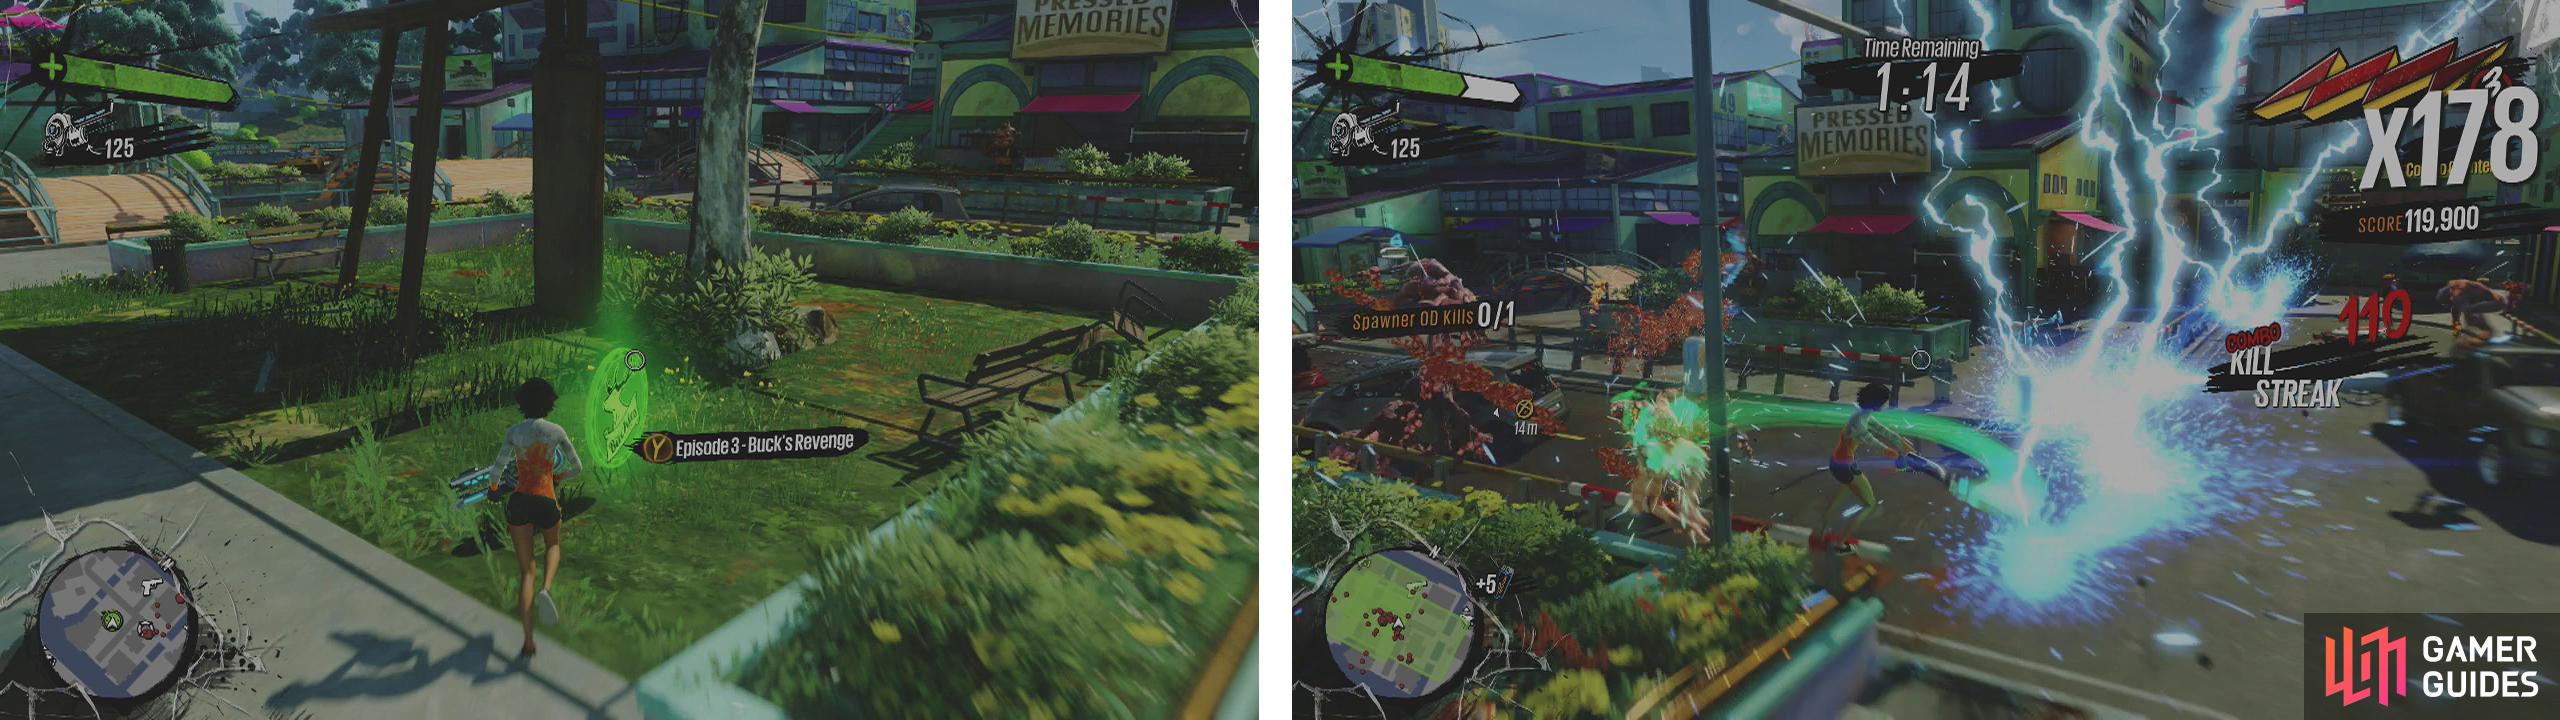 You can start the mission here (left). Grind around the U-shaped railing and melee attack constantly for some solid points (right).